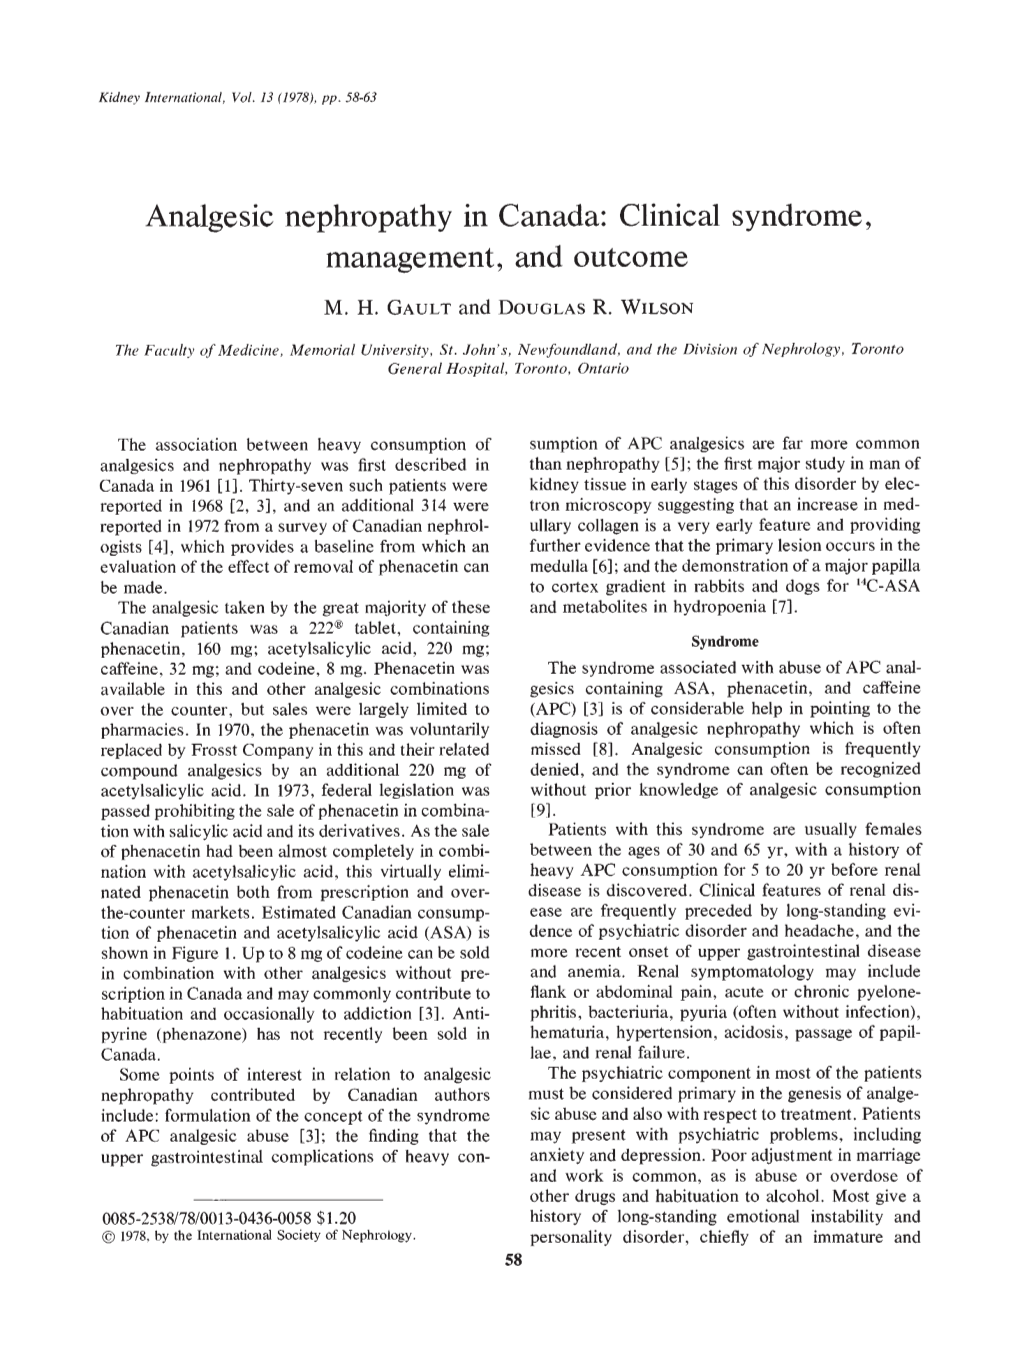 Analgesic Nephropathy in Canada: Clinical Syndrome, Management, and Outcome